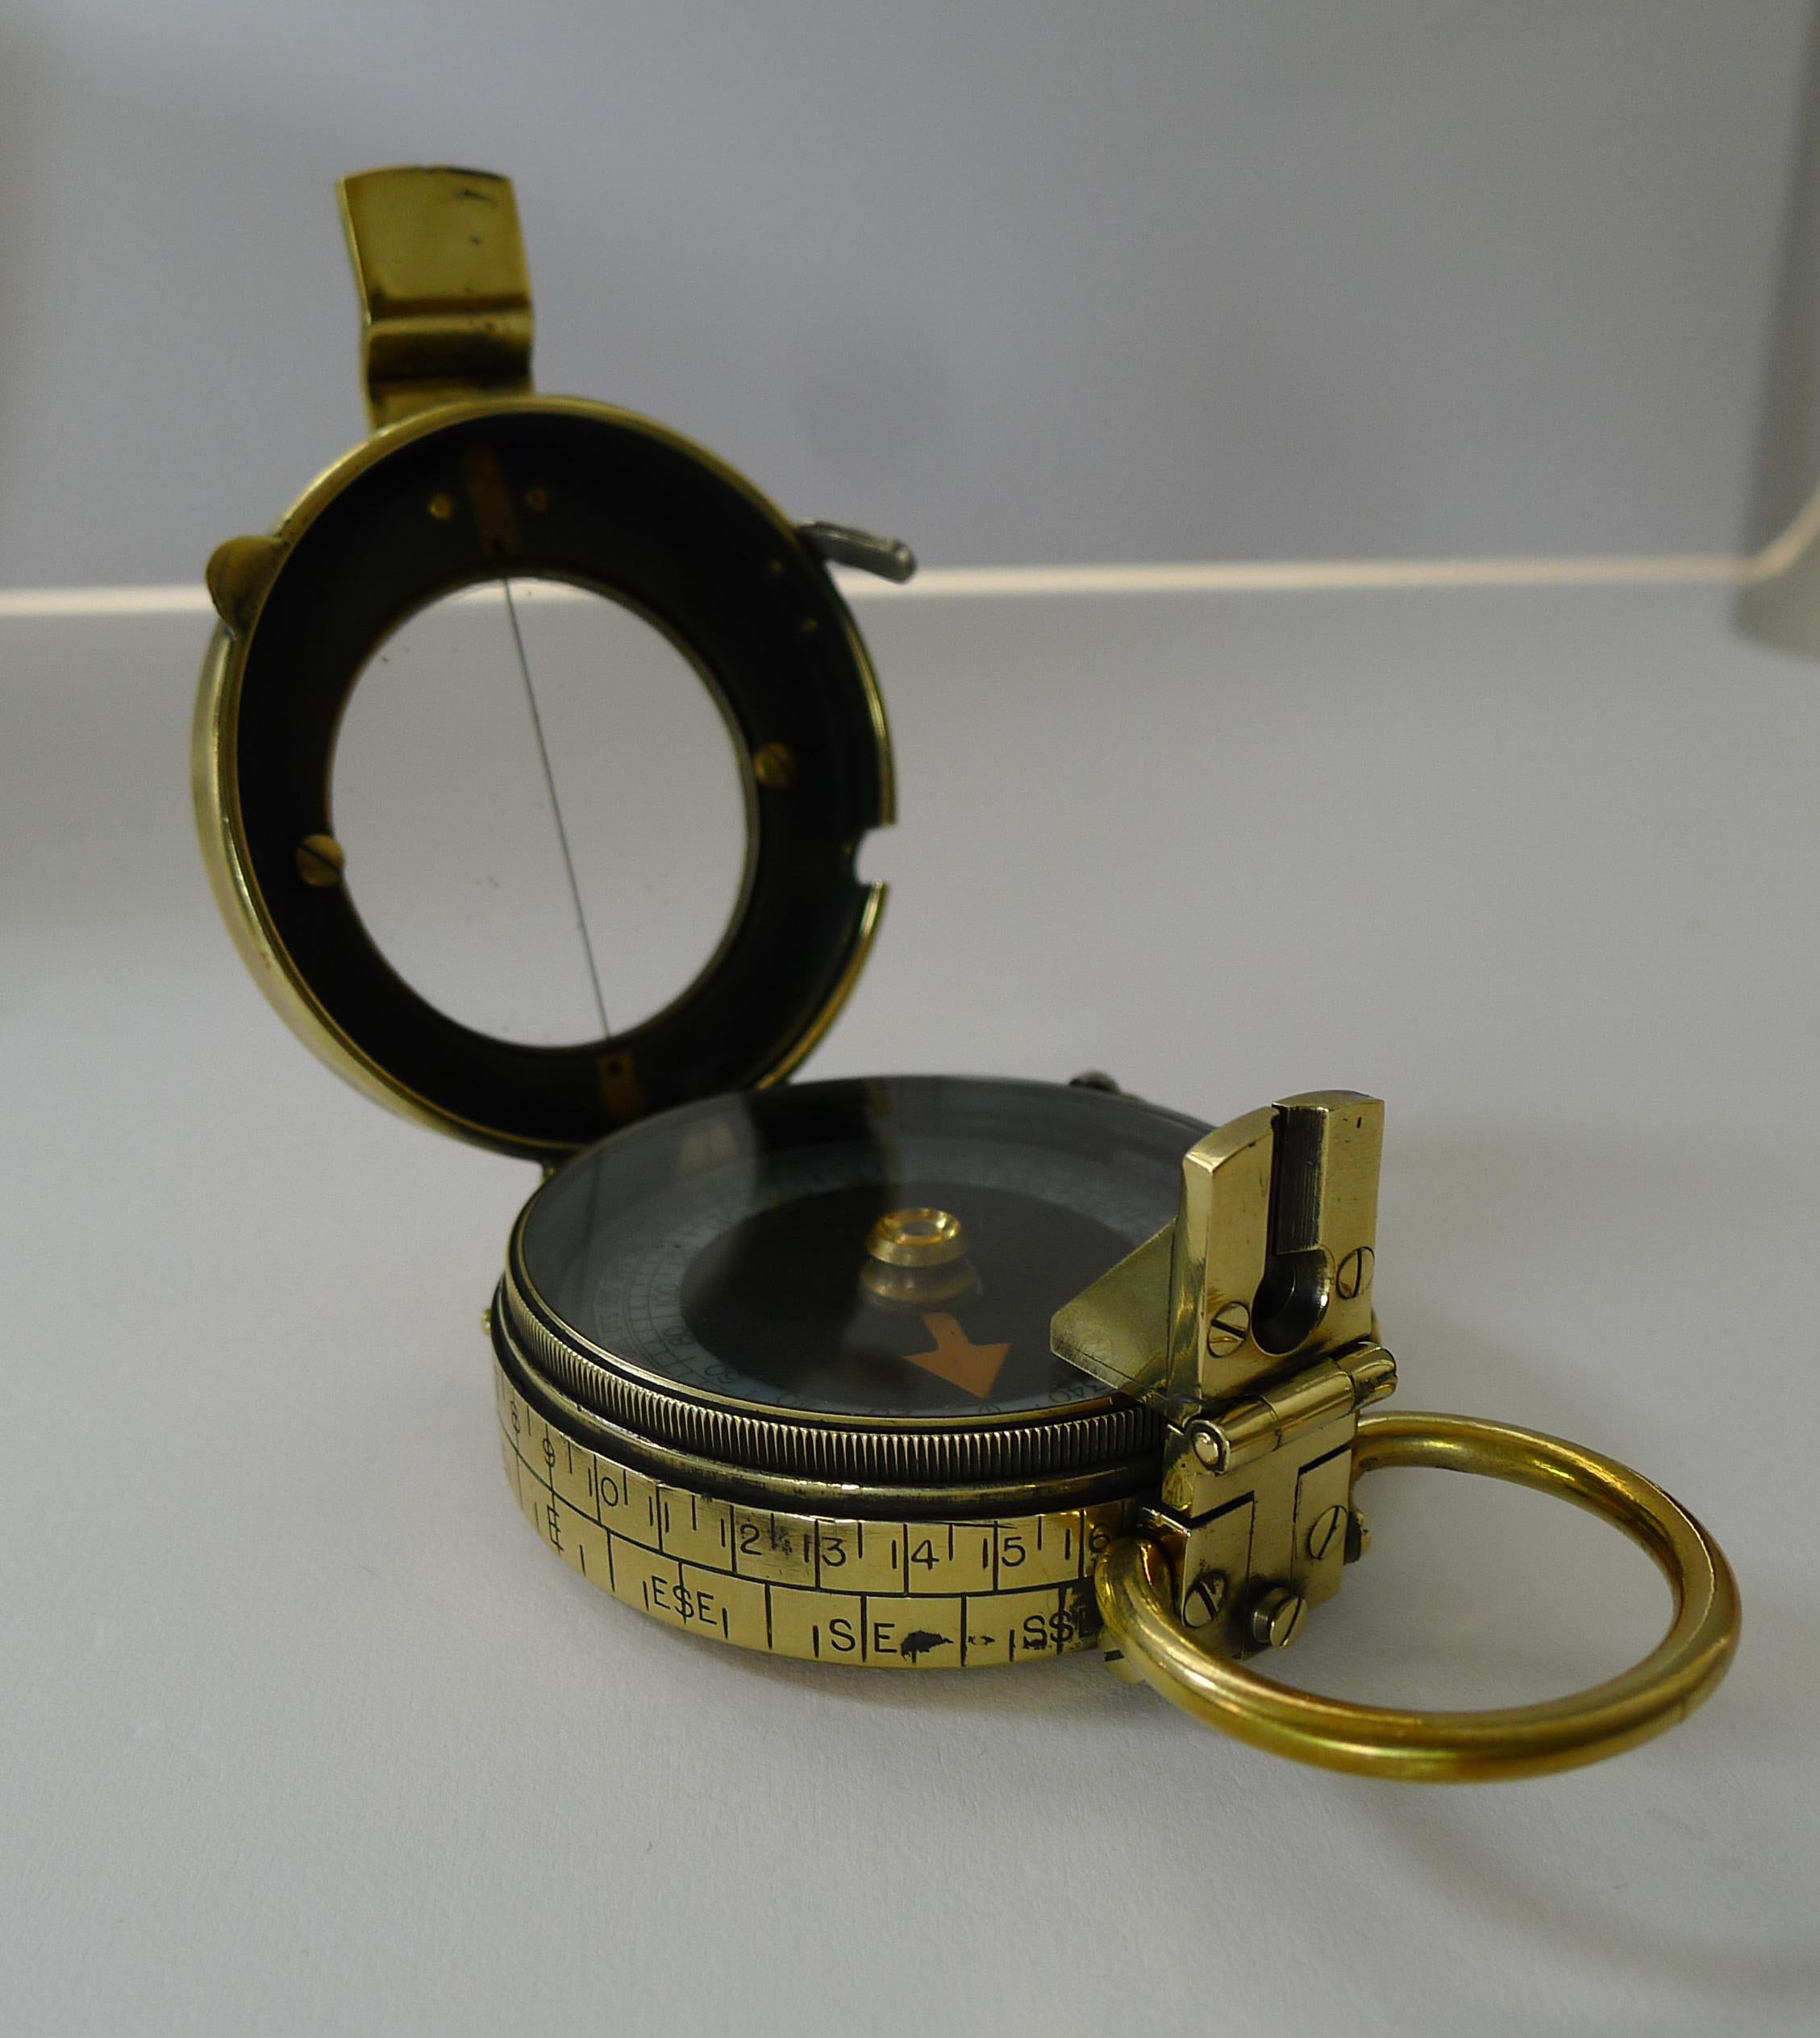 European WWI 1917 British Army Officer's Compass, Verner's Patent Mk viii by French Ltd